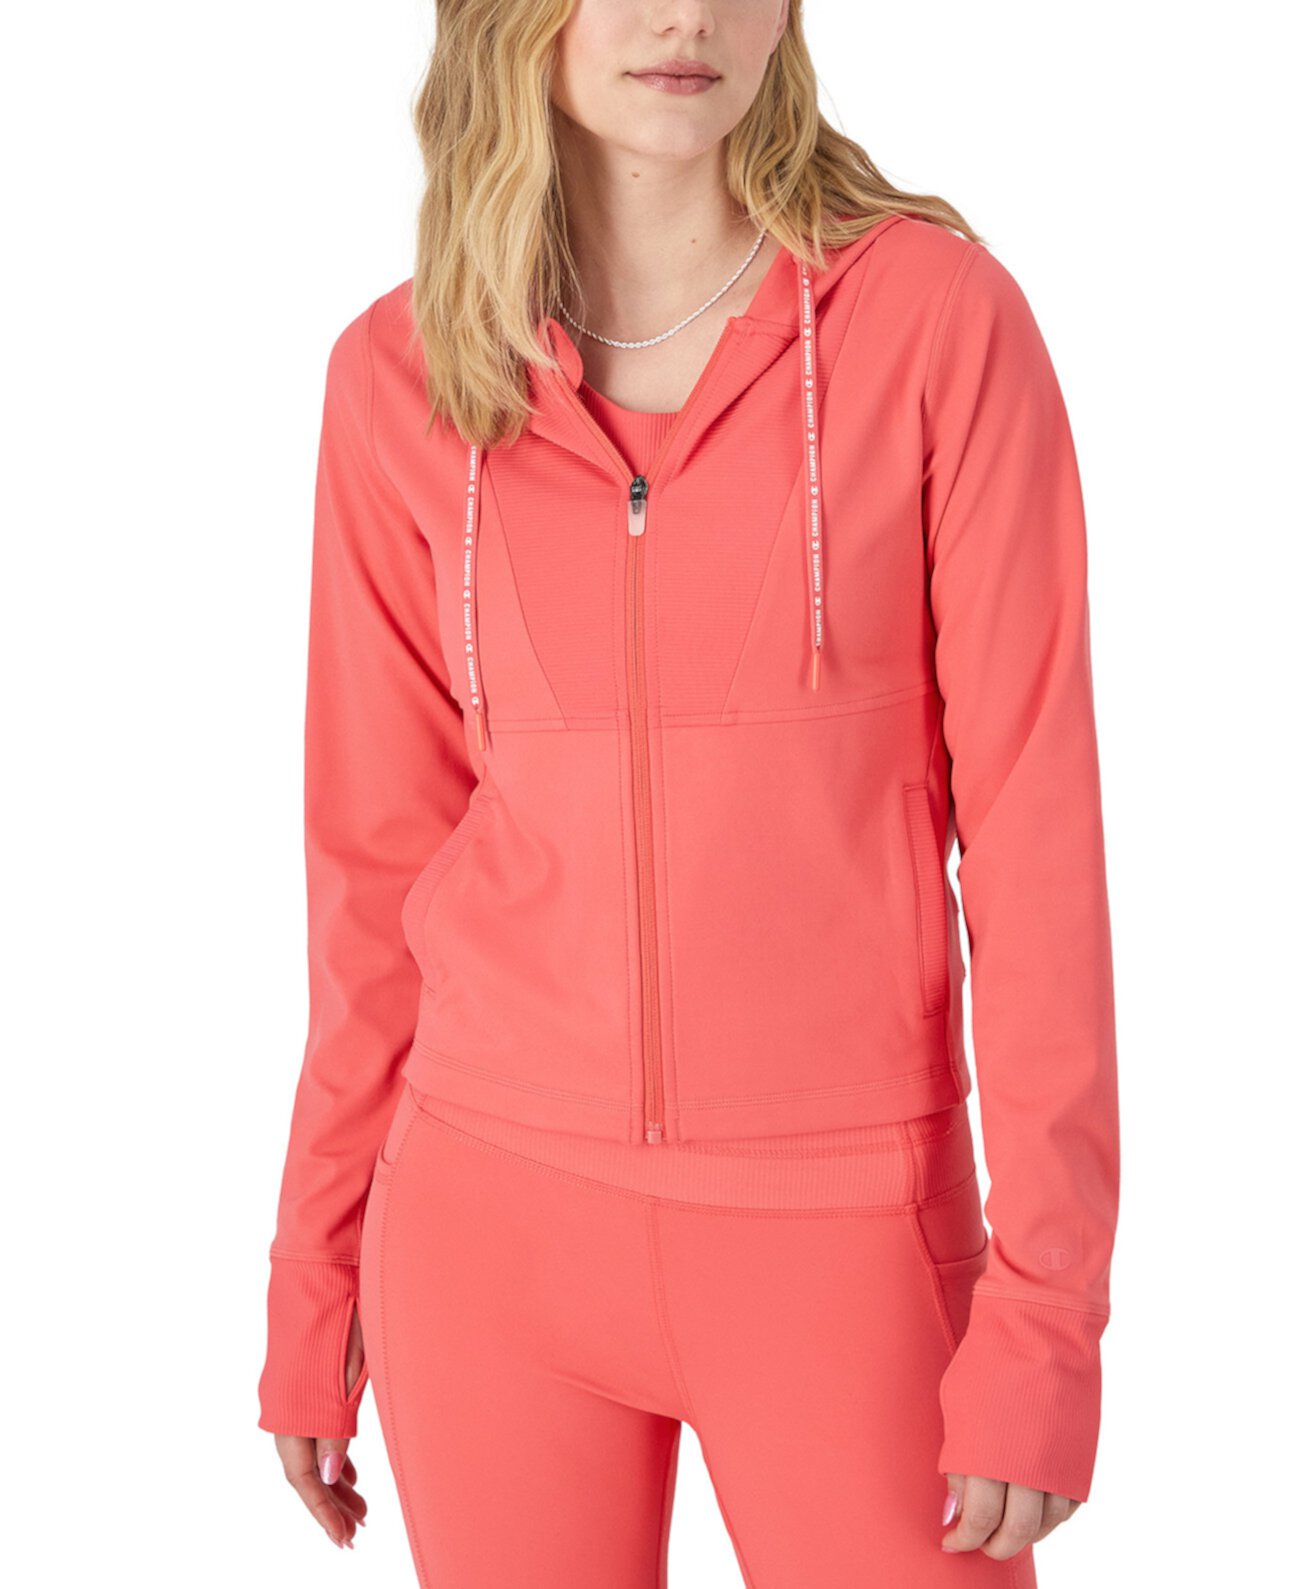 Women's Soft Touch Zip-Front Hooded Jacket Champion